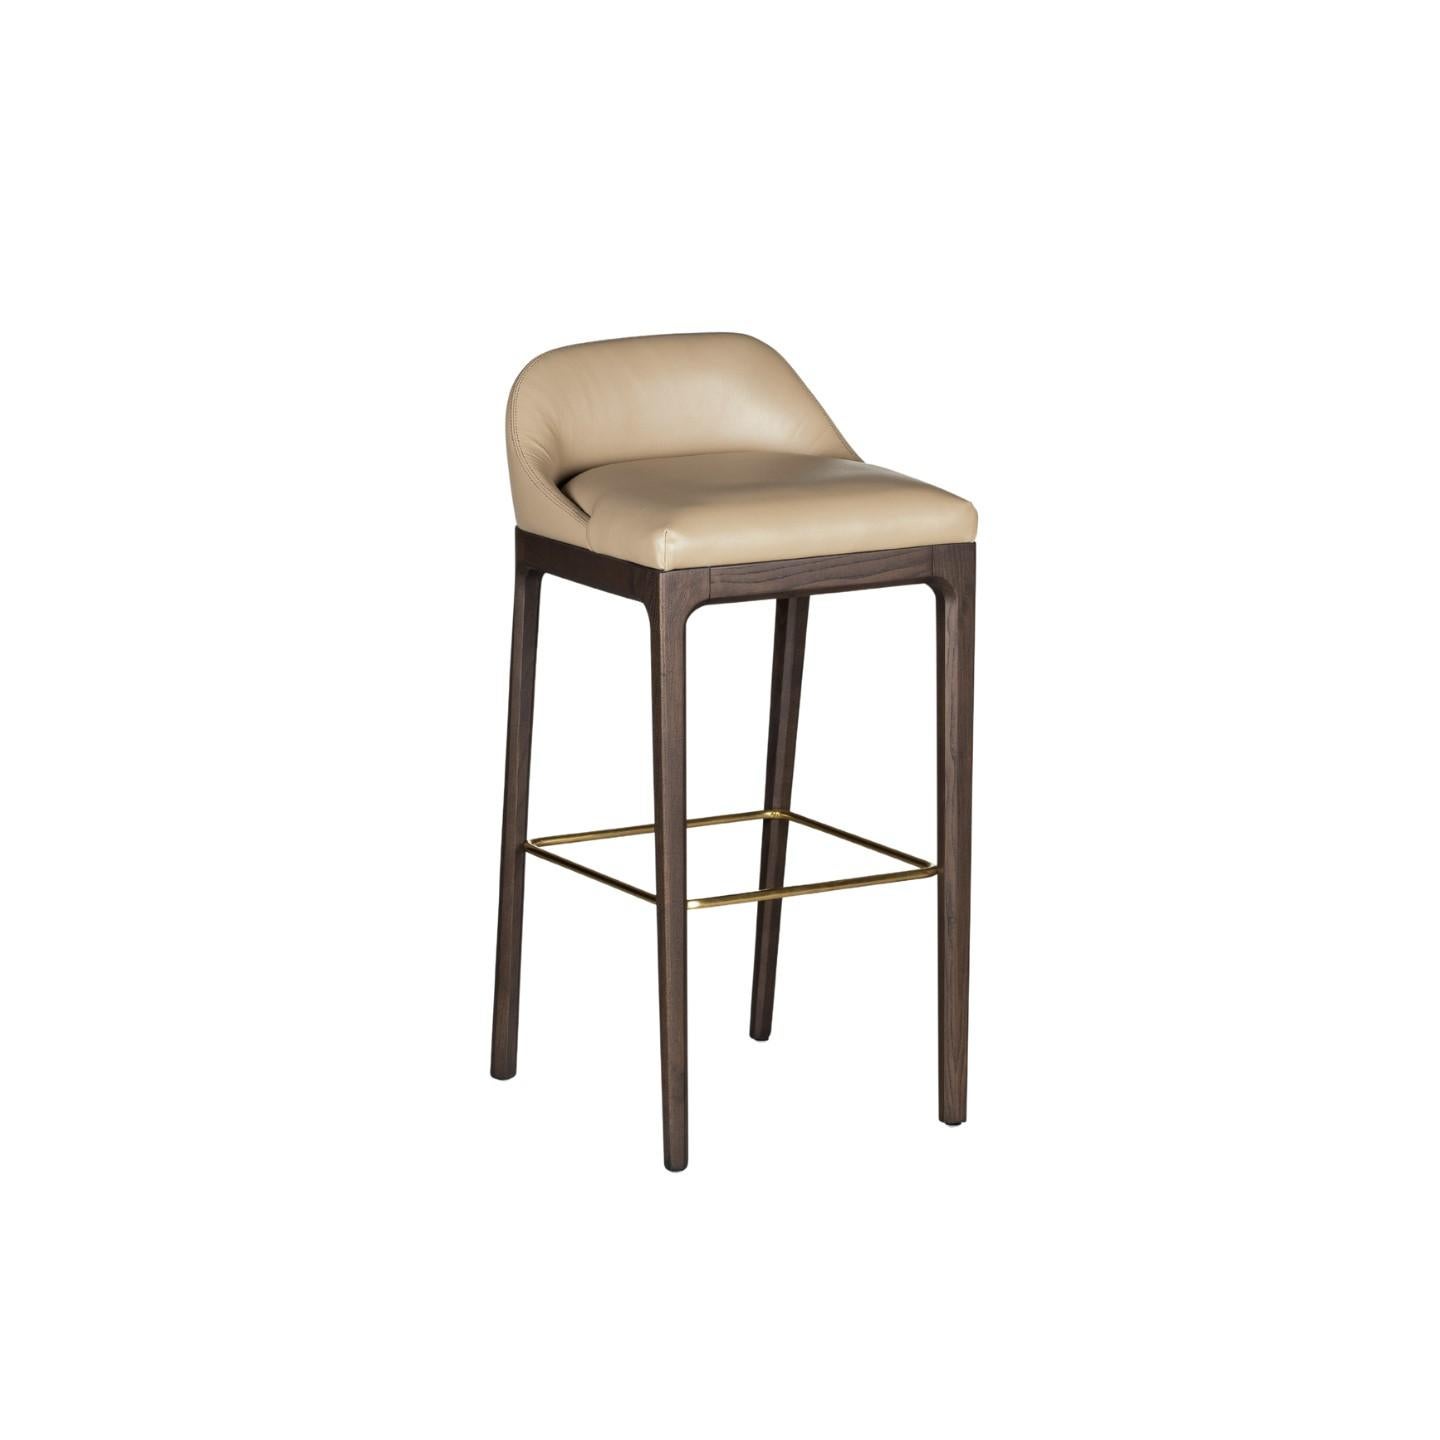 Contemporary style Bellagio bar stool made of ashwood with leather or fabrics upholstered seat, and brass footrest.
Design Libero Rutilo